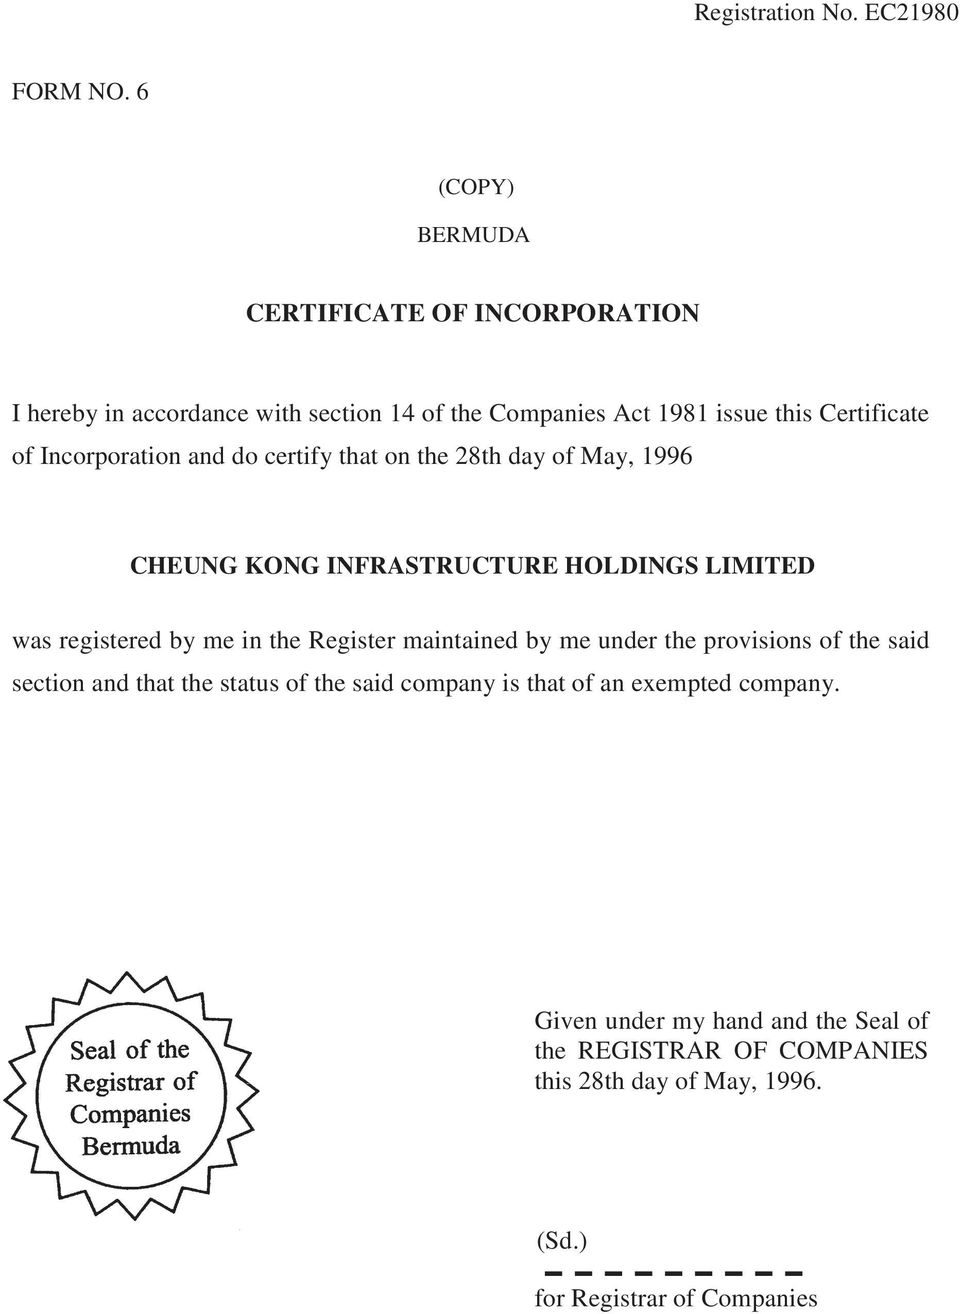 Incorporation and do certify that on the 28th day of May, 1996 CHEUNG KONG INFRASTRUCTURE HOLDINGS LIMITED was registered by me in the